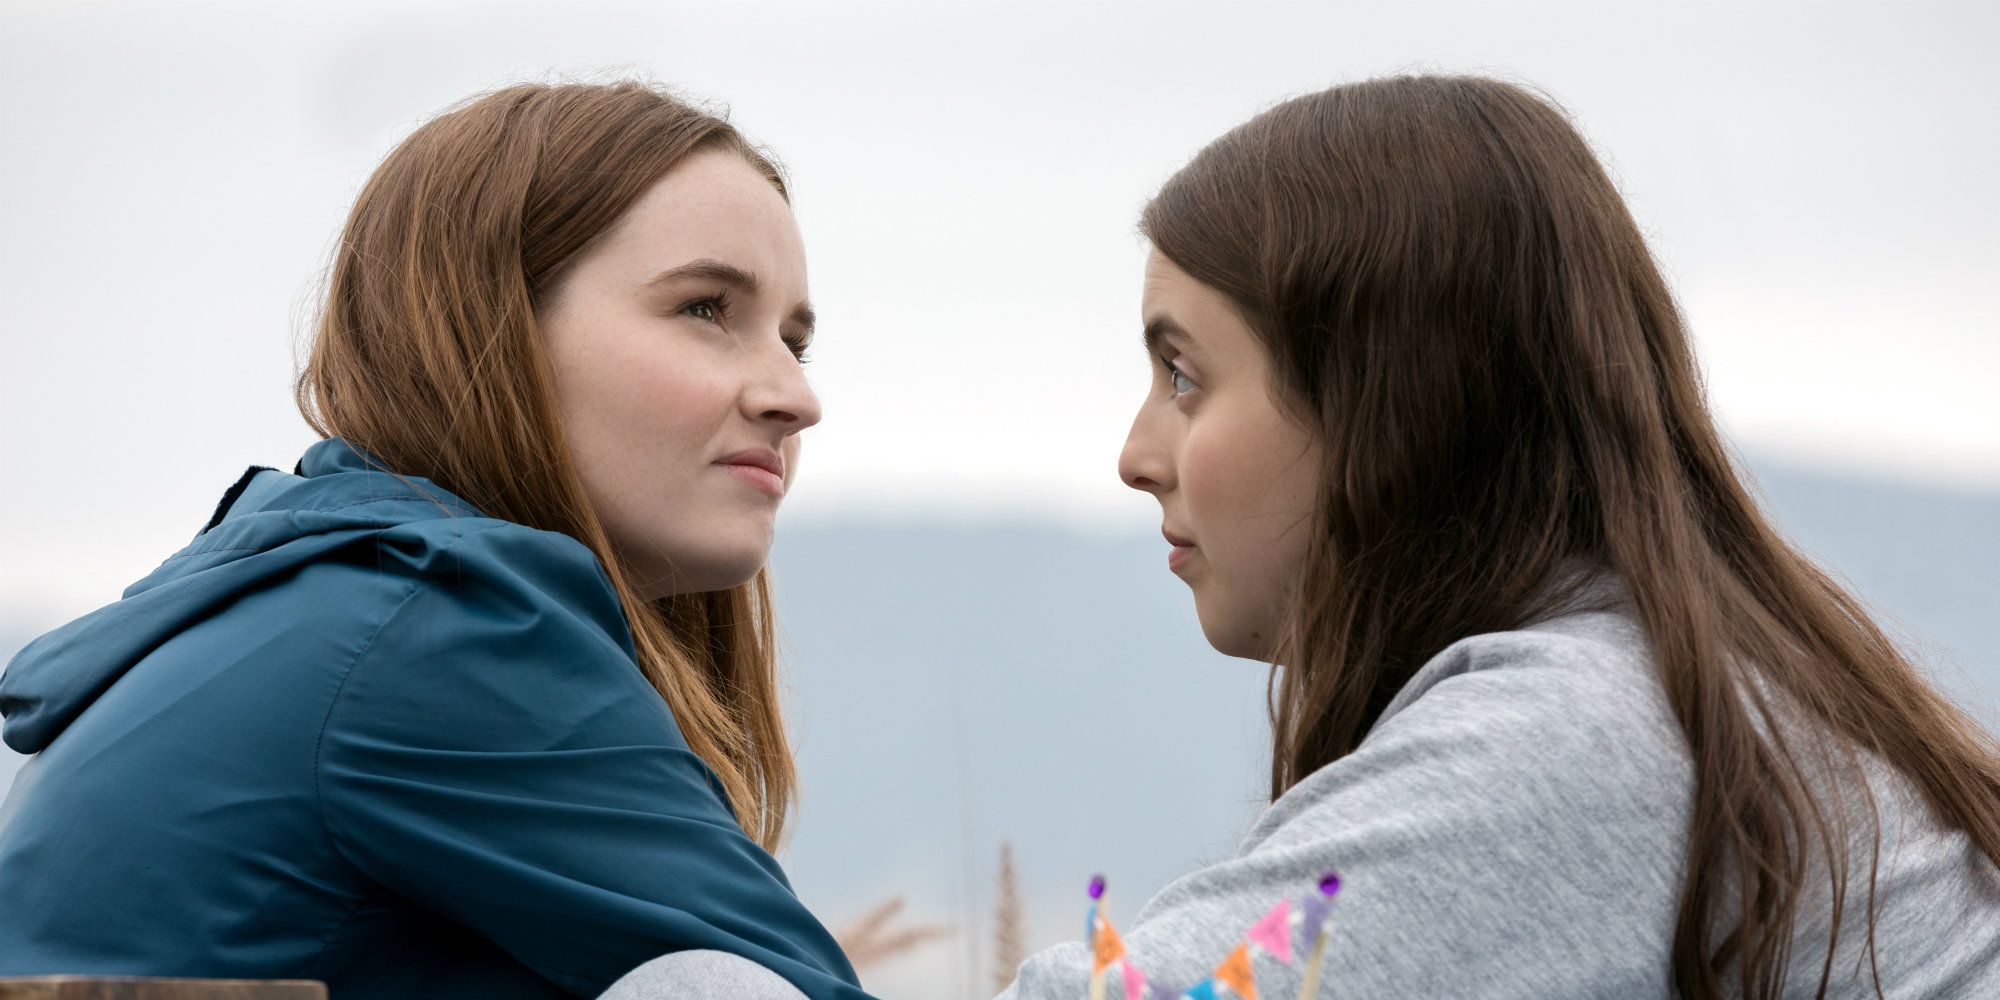 Amy and Molly talk outside in Booksmart